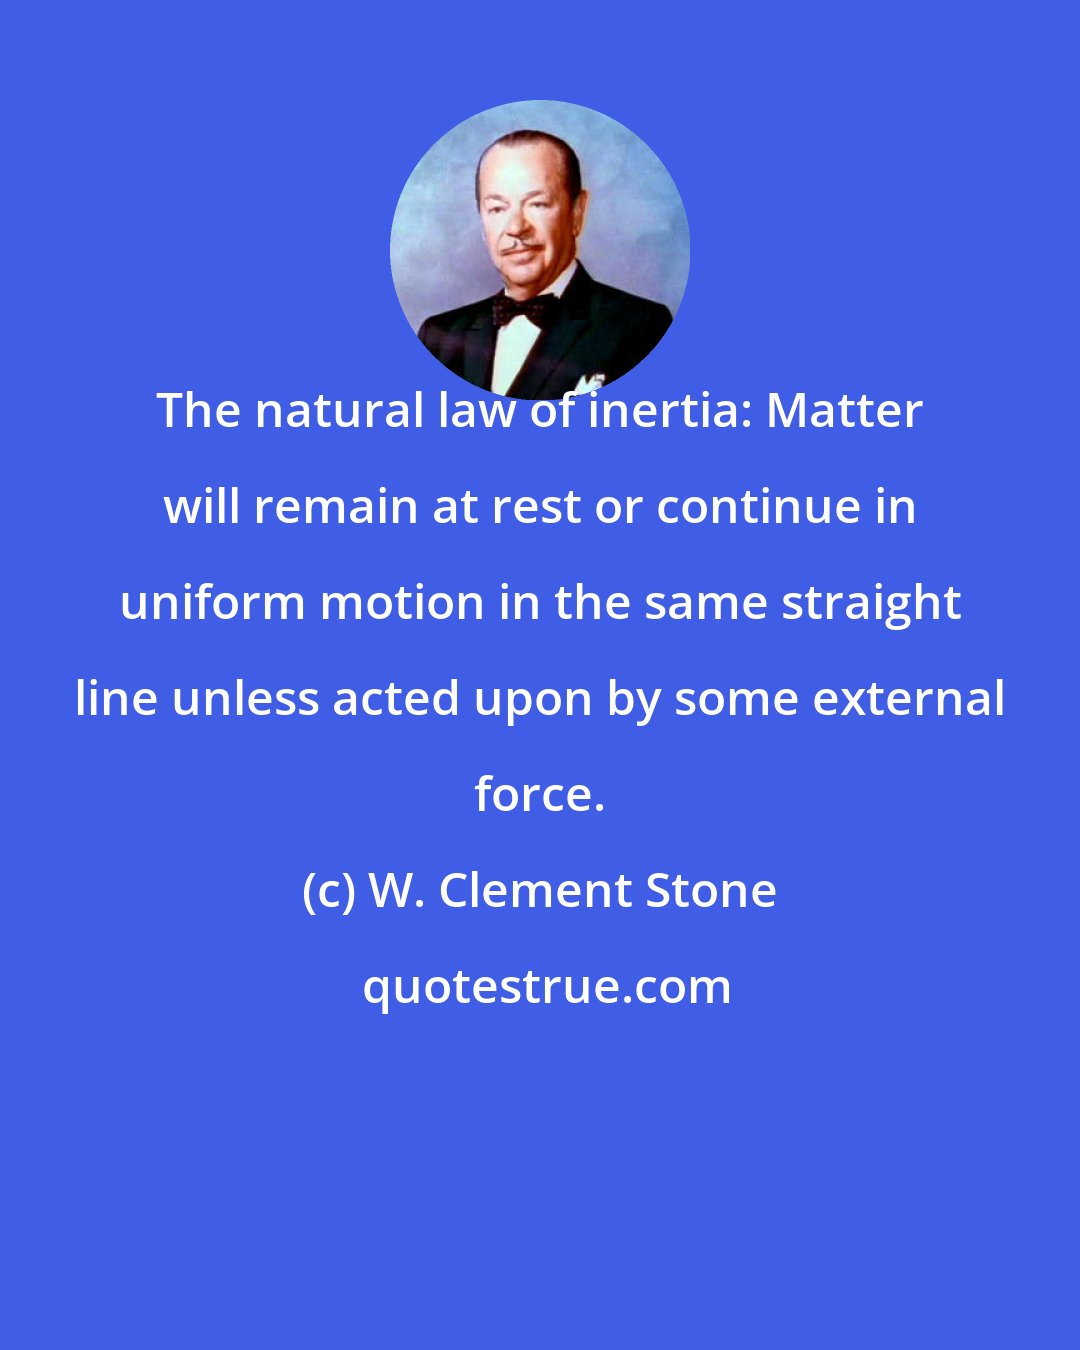 W. Clement Stone: The natural law of inertia: Matter will remain at rest or continue in uniform motion in the same straight line unless acted upon by some external force.